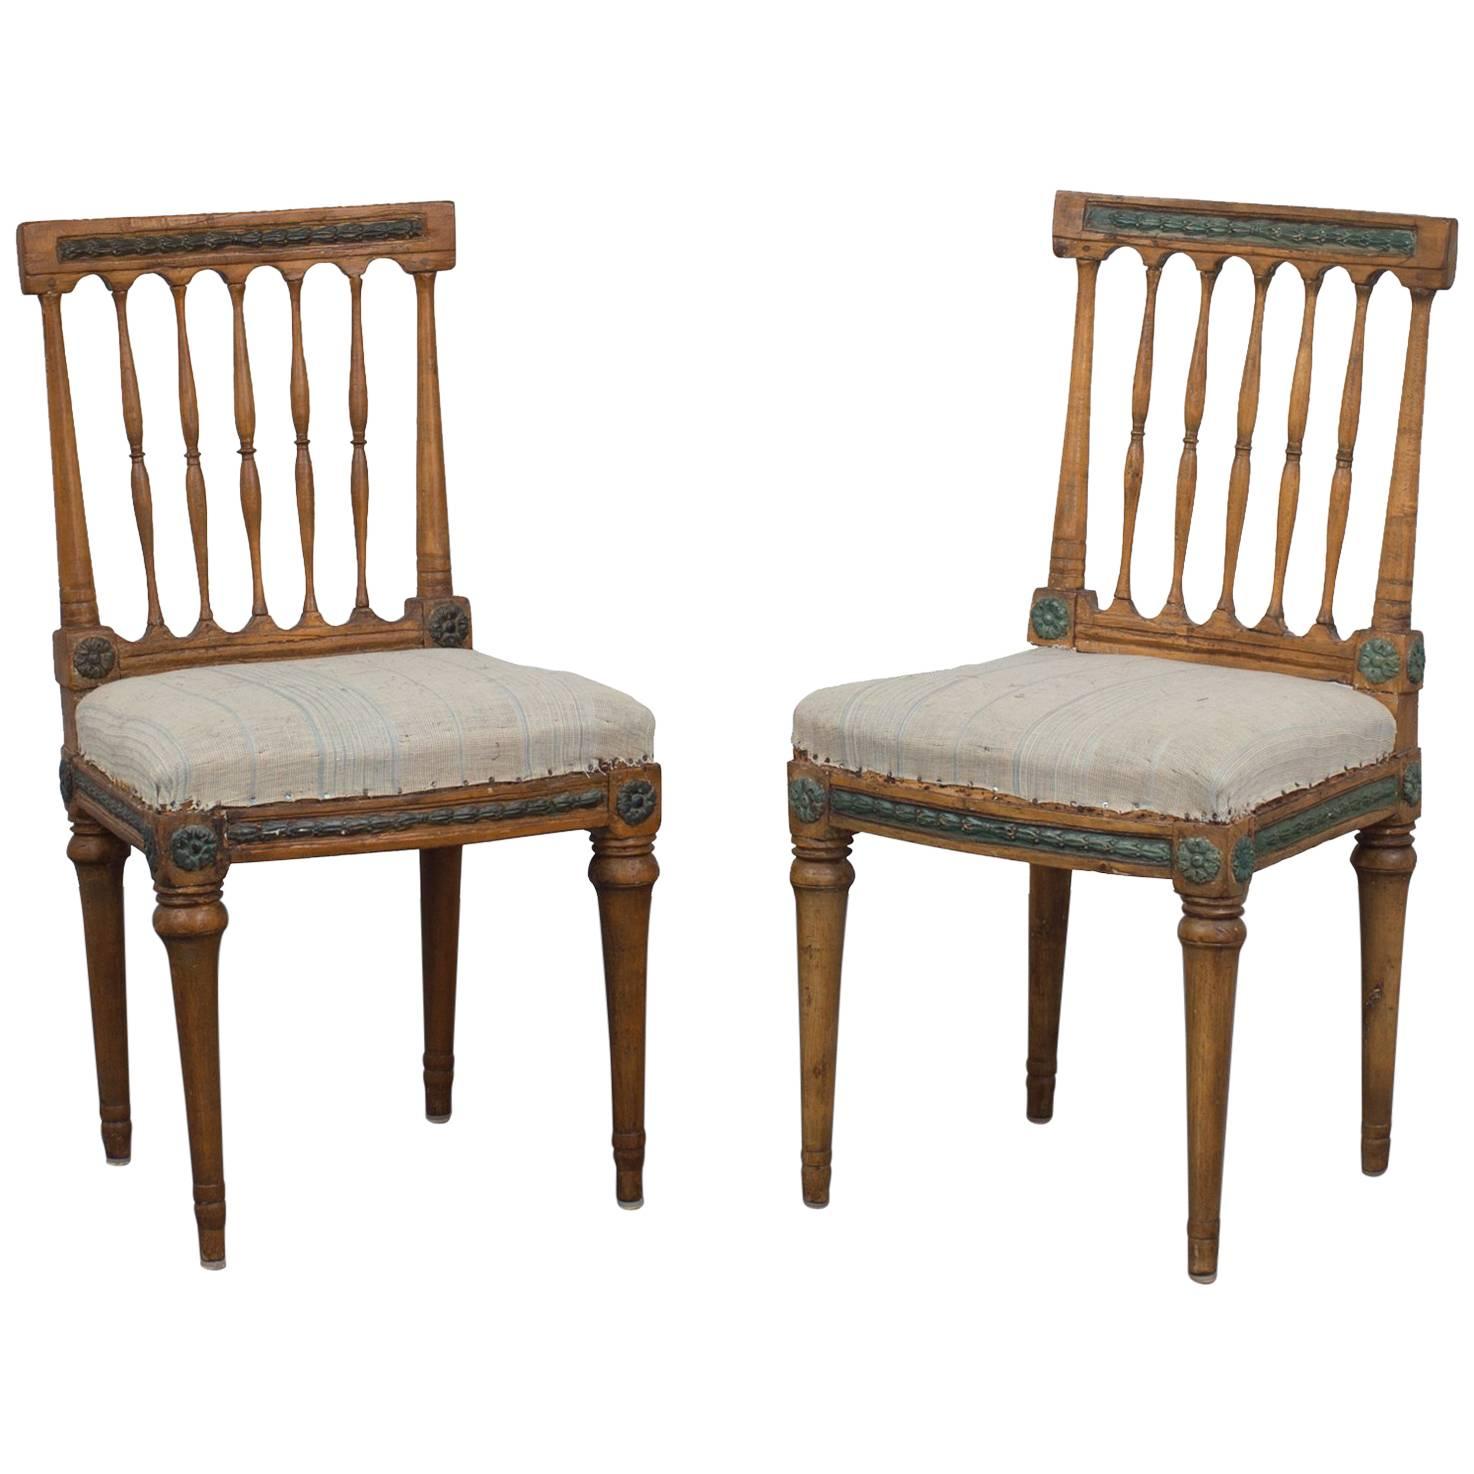 Pair of Side Chairs Gustavian Period Sweden